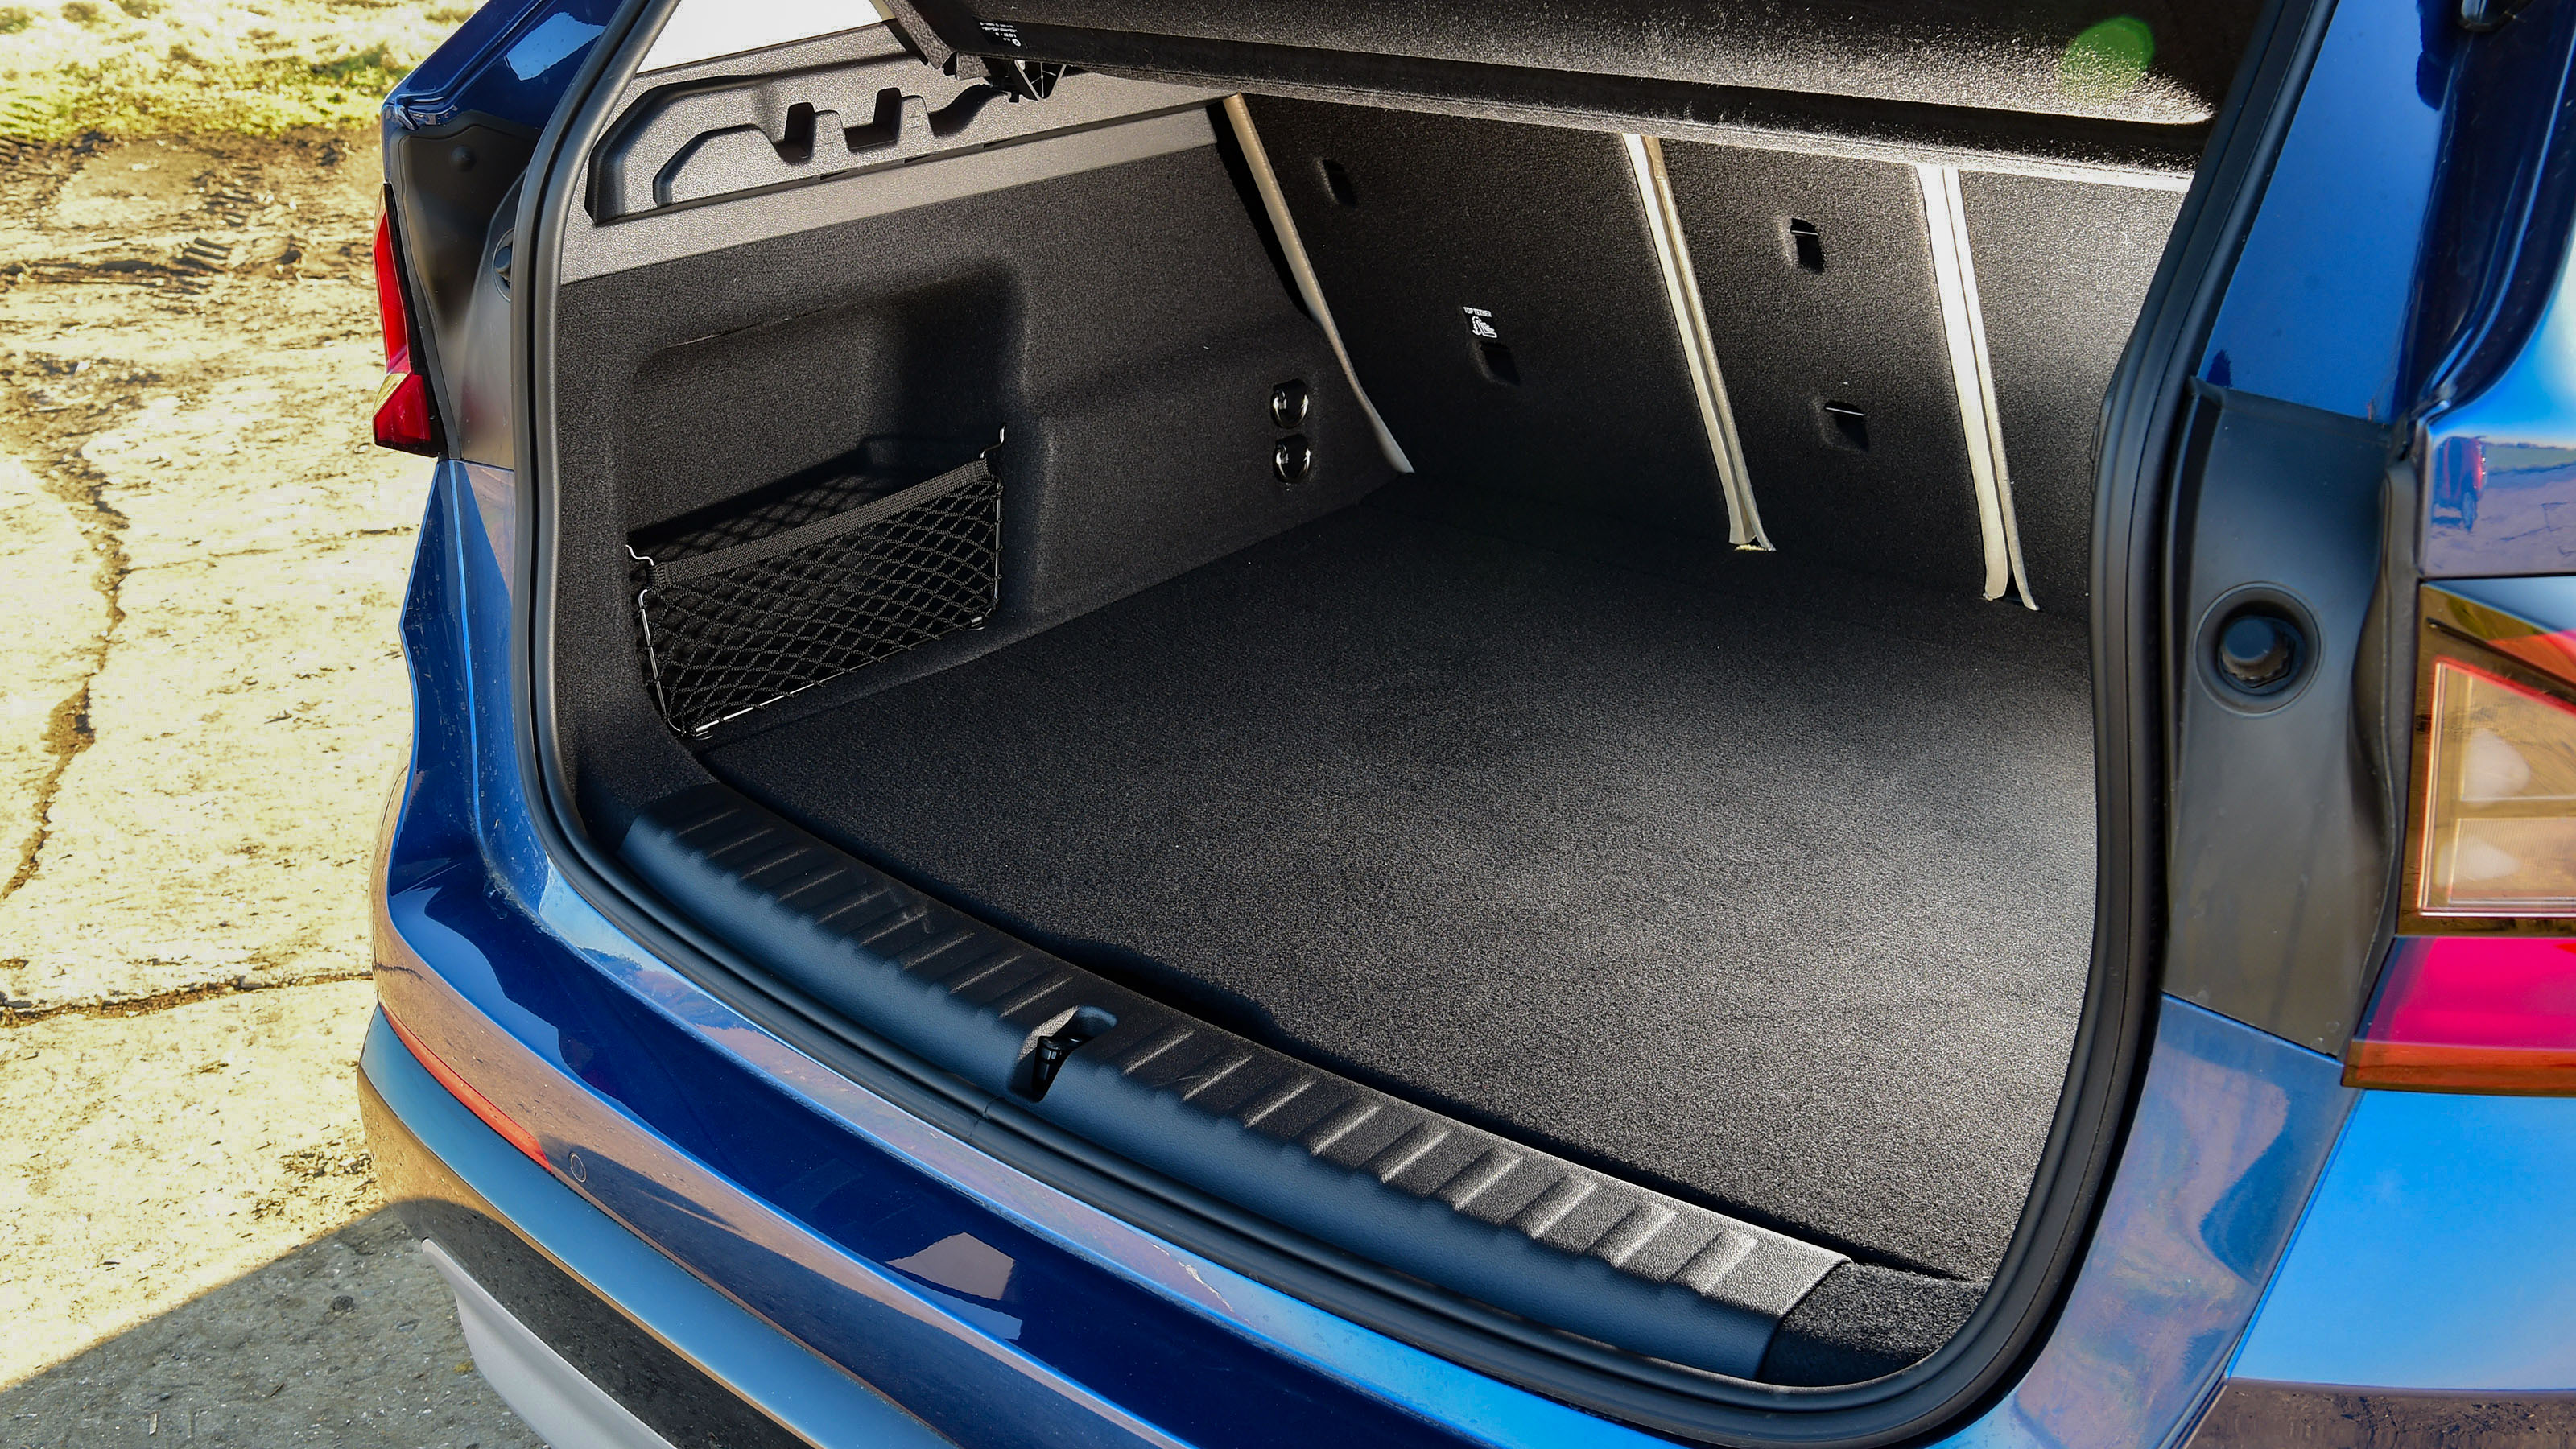 BMW X1 dimensions, boot space and electrification